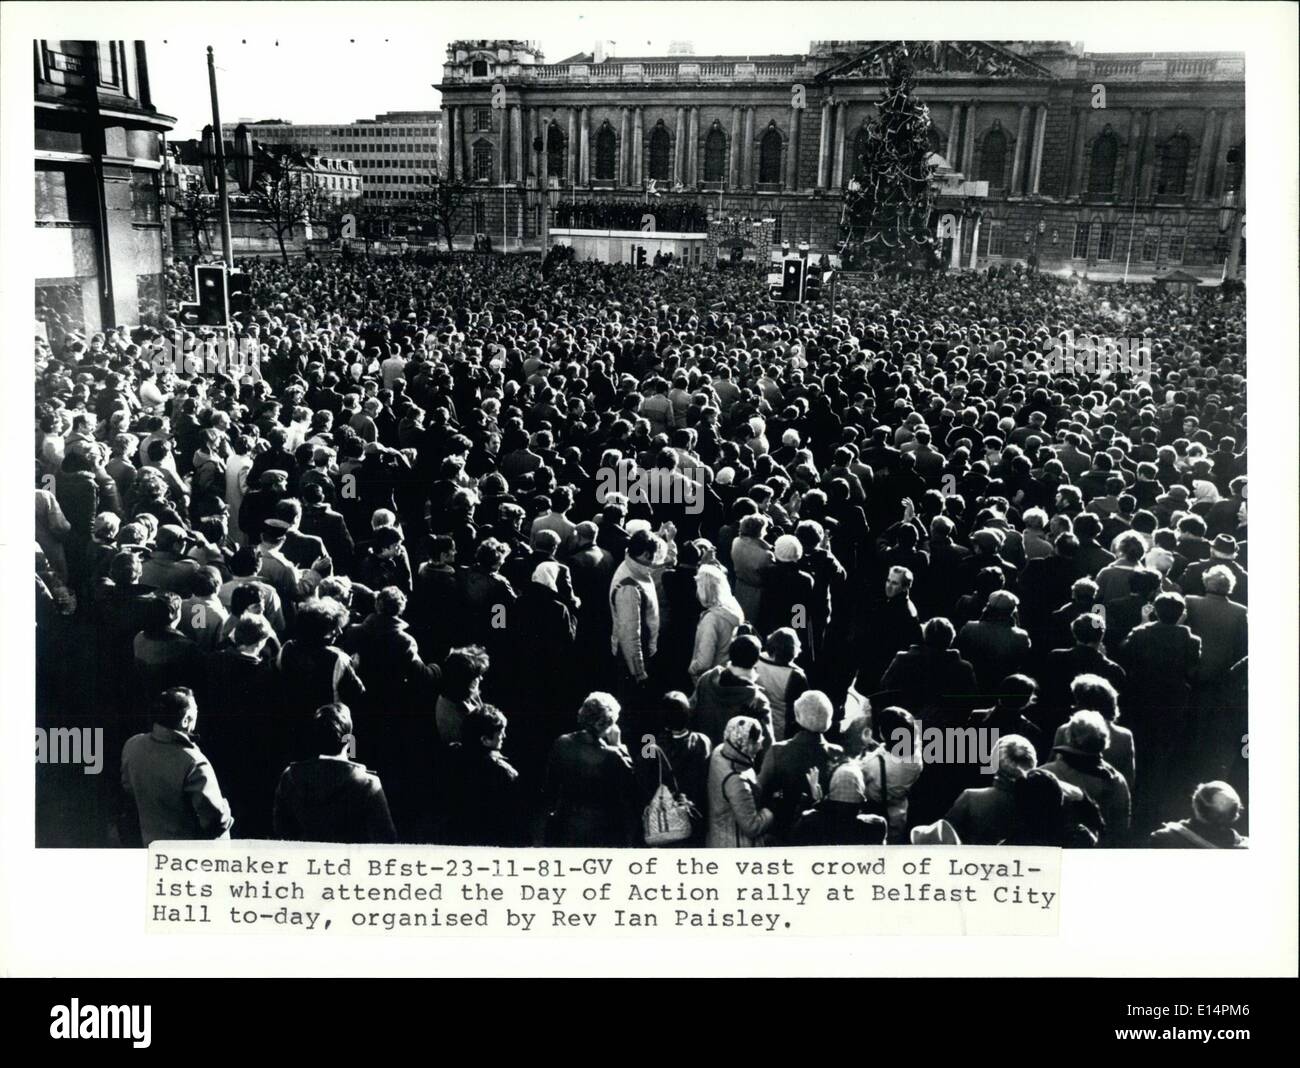 Apr. 18, 2012 - Pacemaker Ltd Bfst-23-11-81-GV of the vast crowd of Loyalists which attended the Day of Action rally at Belfast Stock Photo